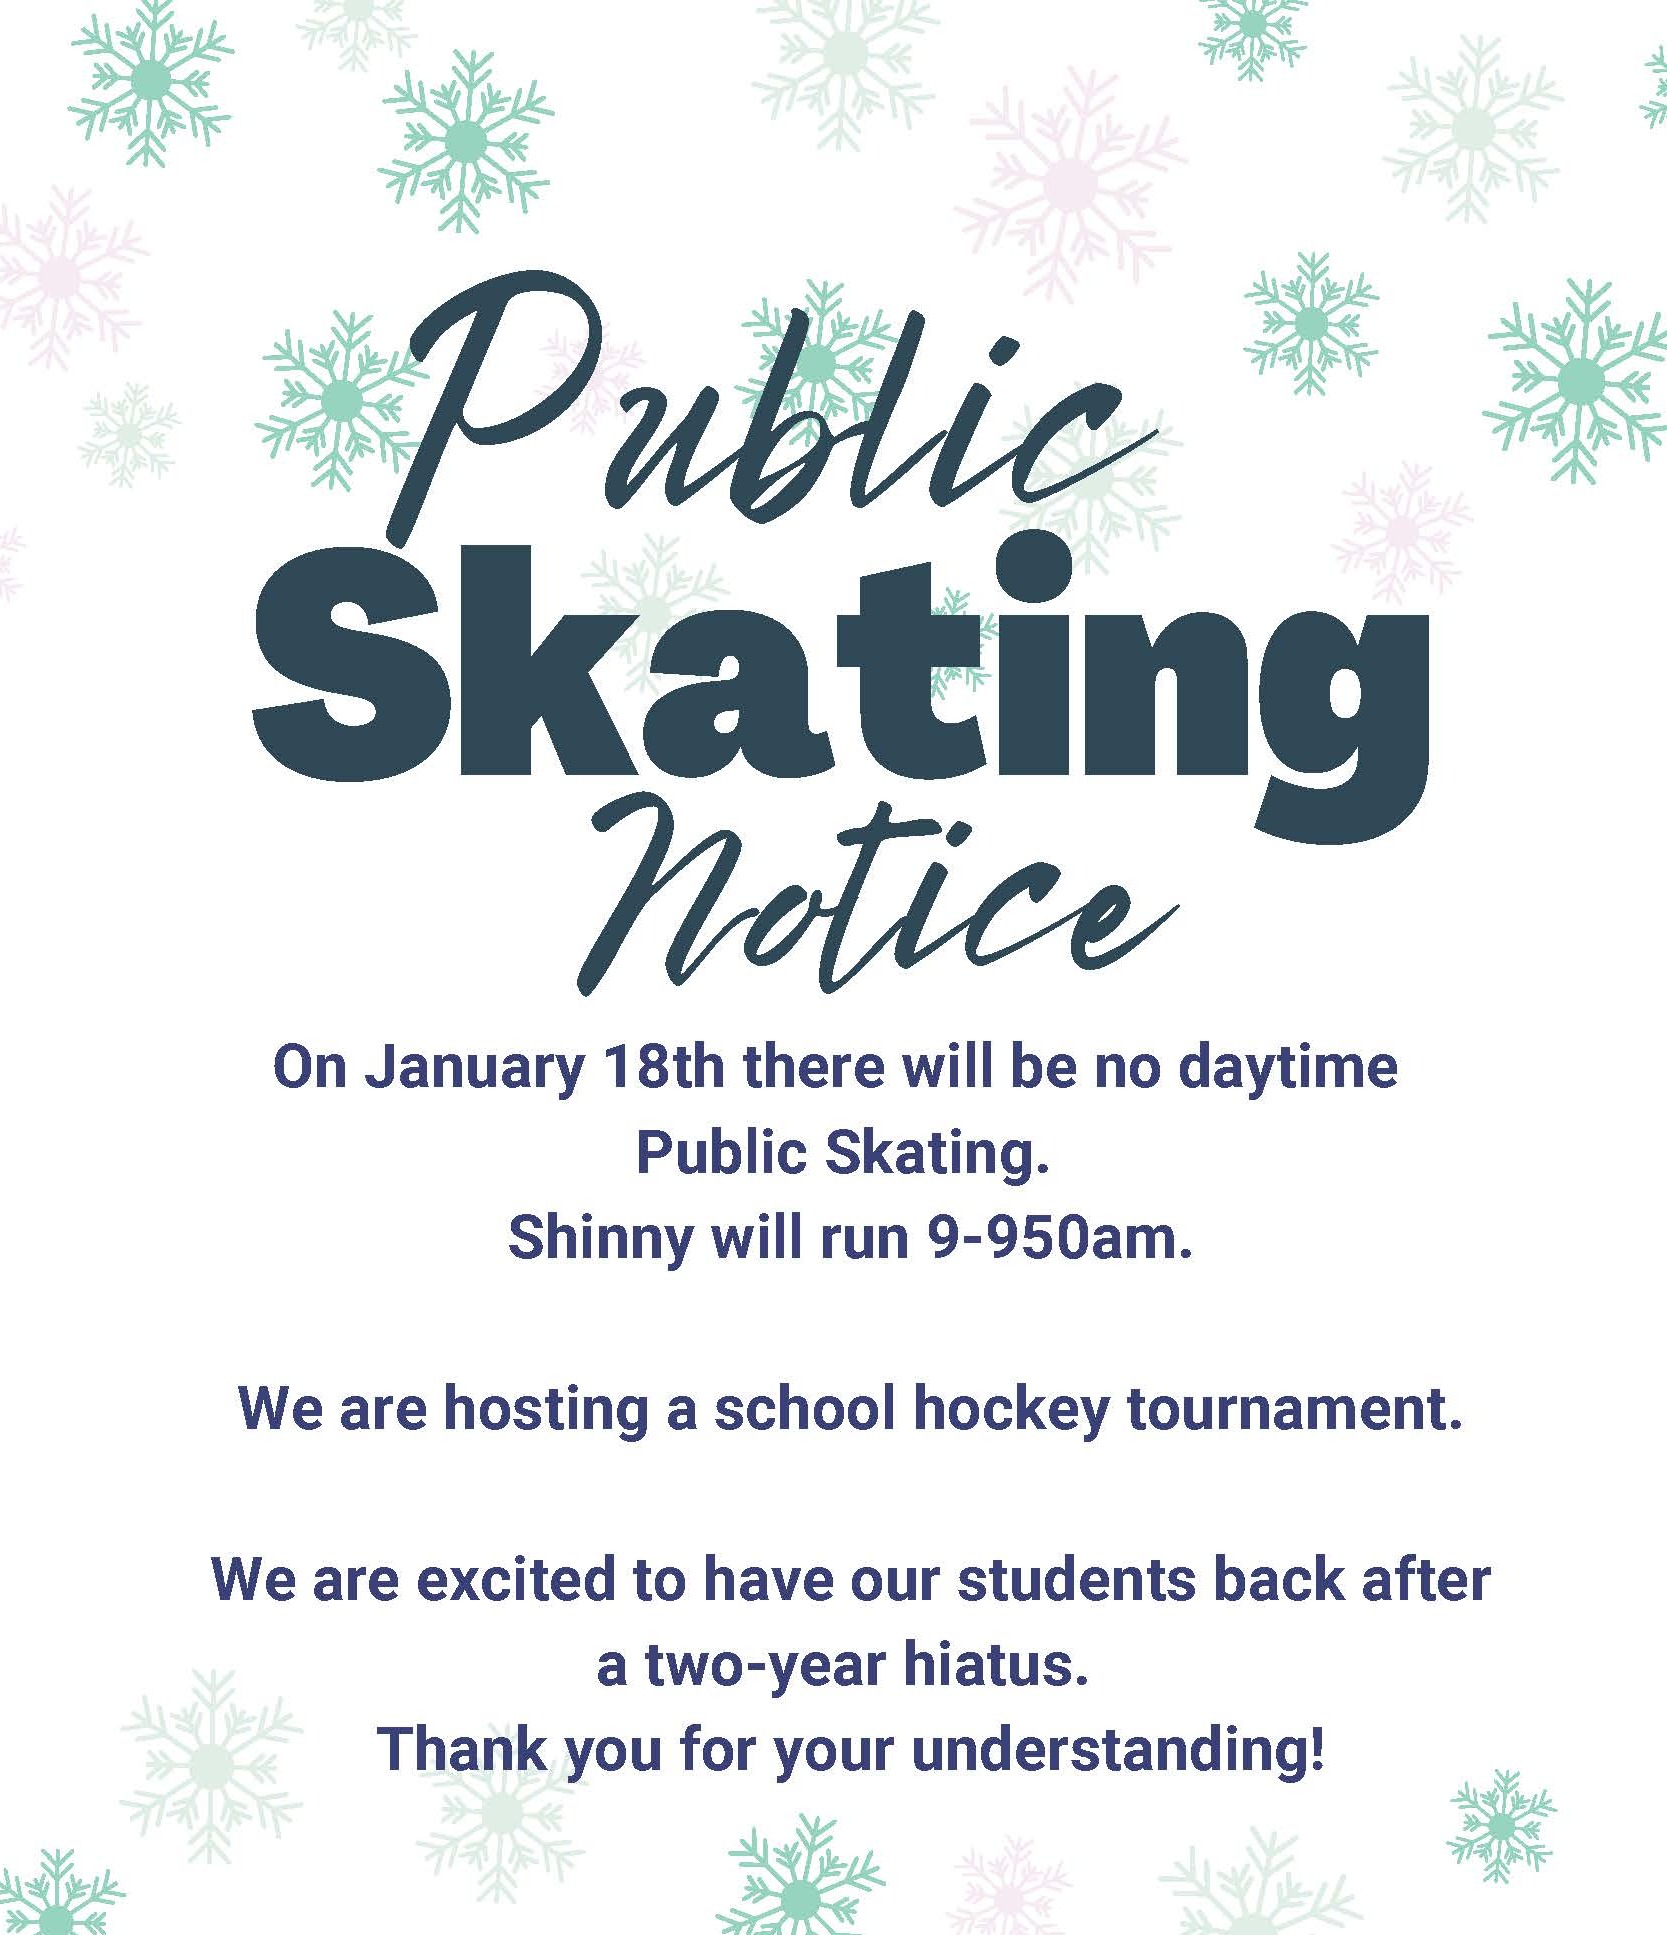 Public Skating Notice: On January 18th, there will be no daytime public skating. Shinny will run from 9-9:50am. We are hosting a school hockey tournament. We are excited to have our students back after a two year hiatus. Thank you for your understanding!